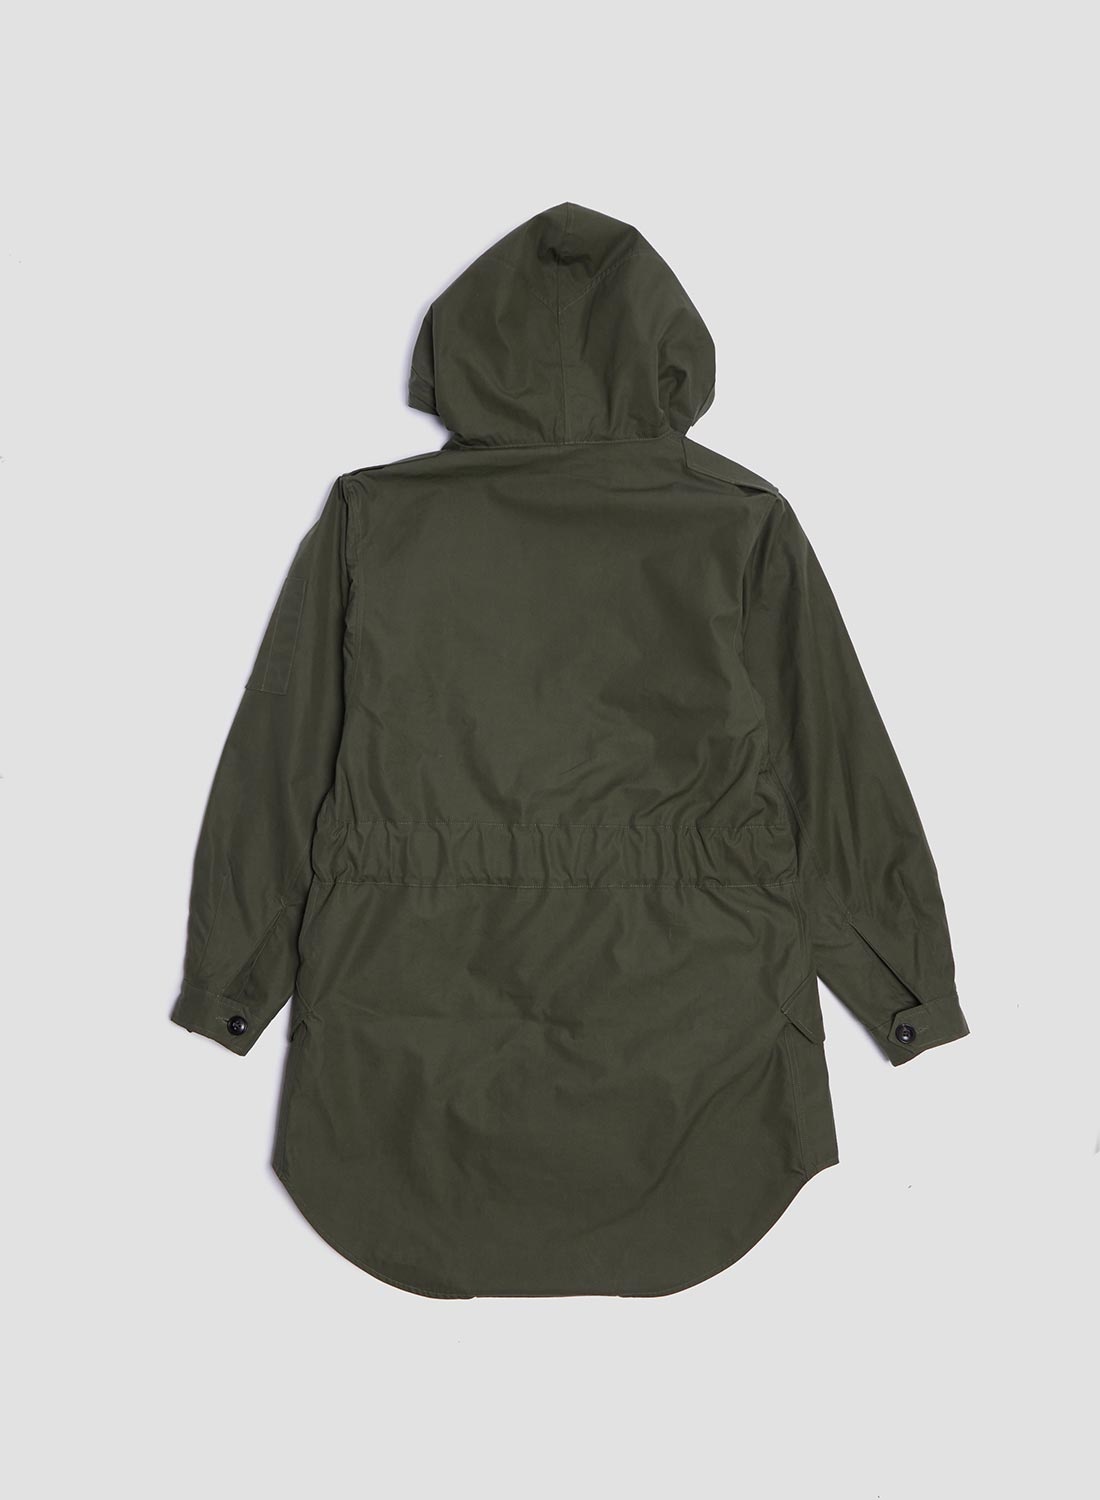 Cold Weather Parka in Olive - 5